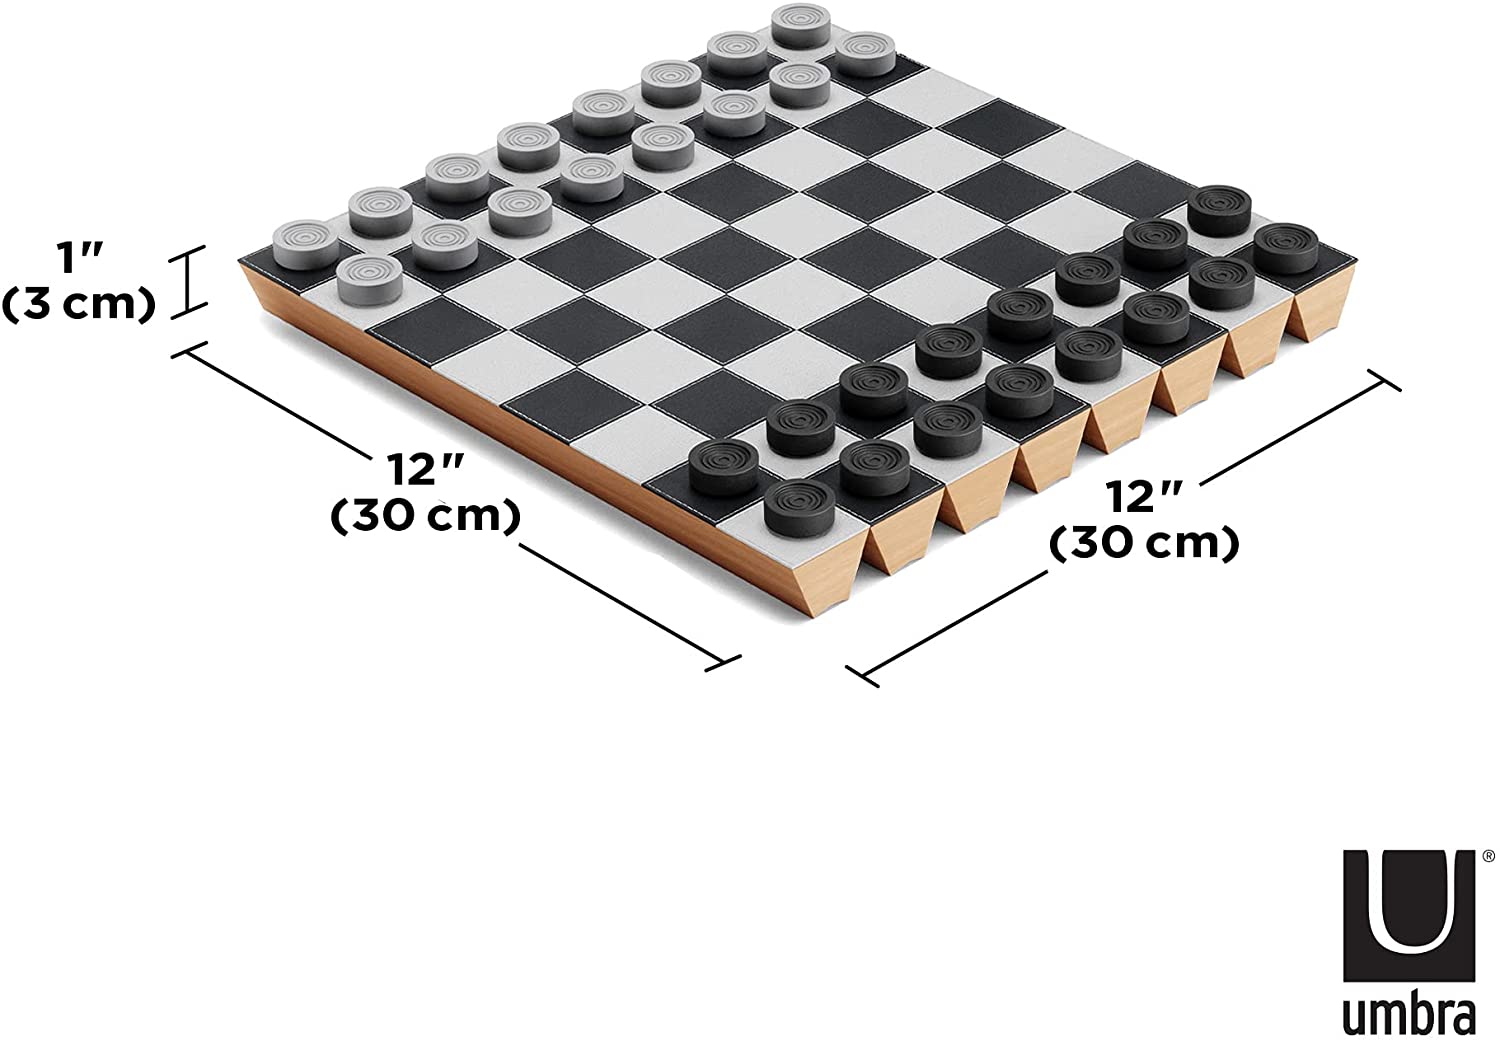 roll-up chess/checkers